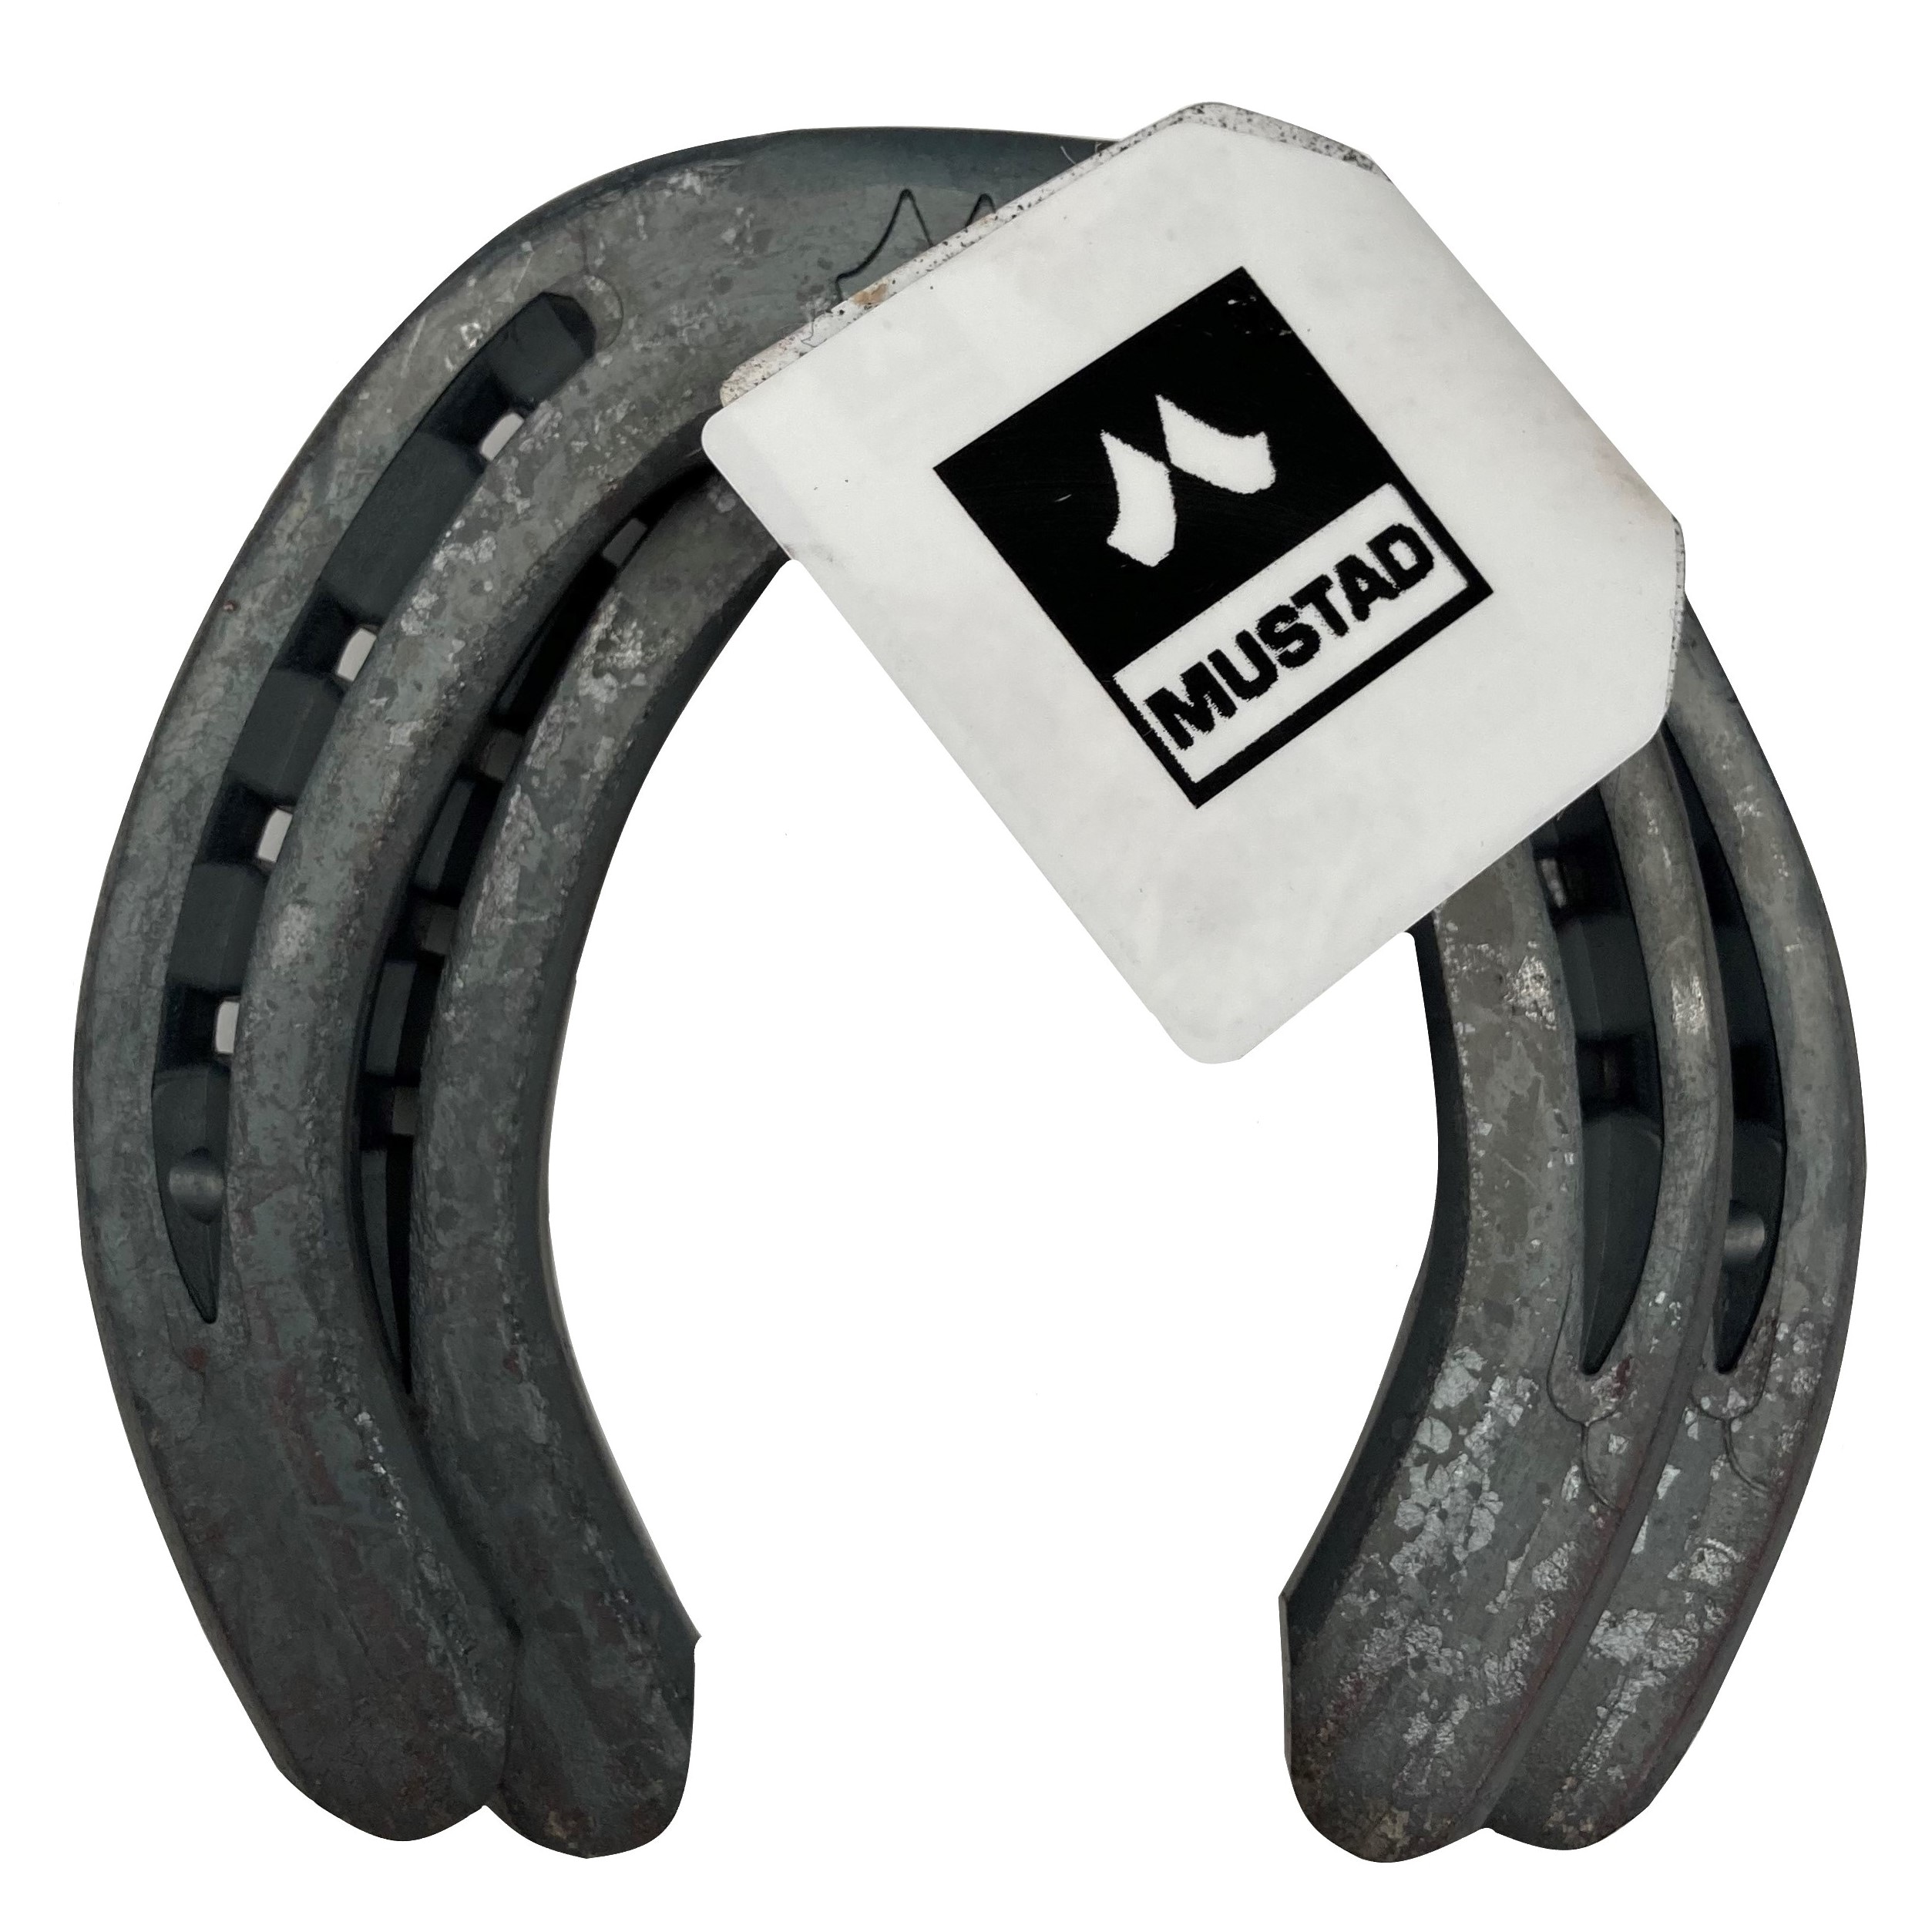 Mustad Libero Hind, 20x8, PAIR PACKED, toe clipped riding shoe